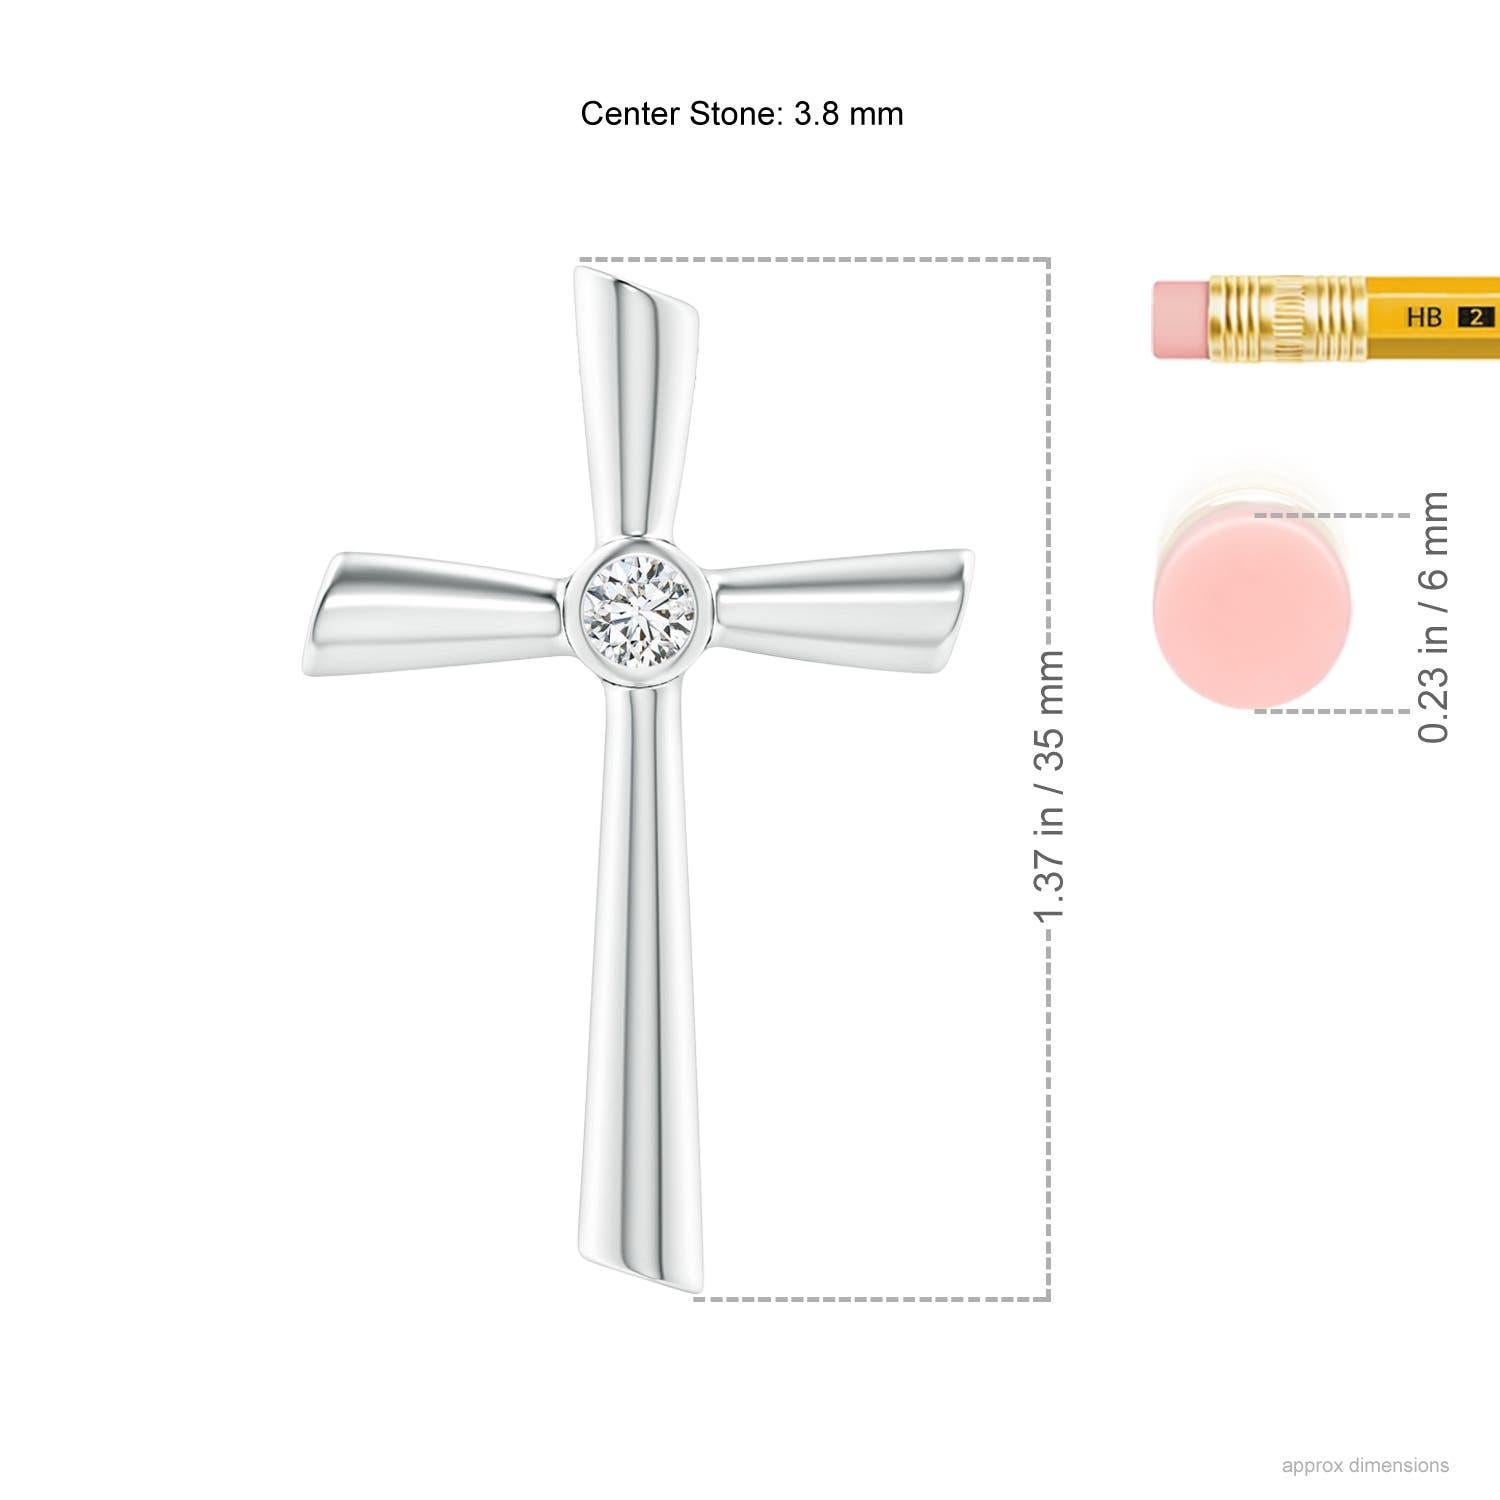 Designed in 14k white gold, this diamond crucifix pendant features a twinkling solitaire diamond at the core. The grooves exude a reflective allure that complements the brilliance of the round diamond.
Diamond is the Birthstone for April and